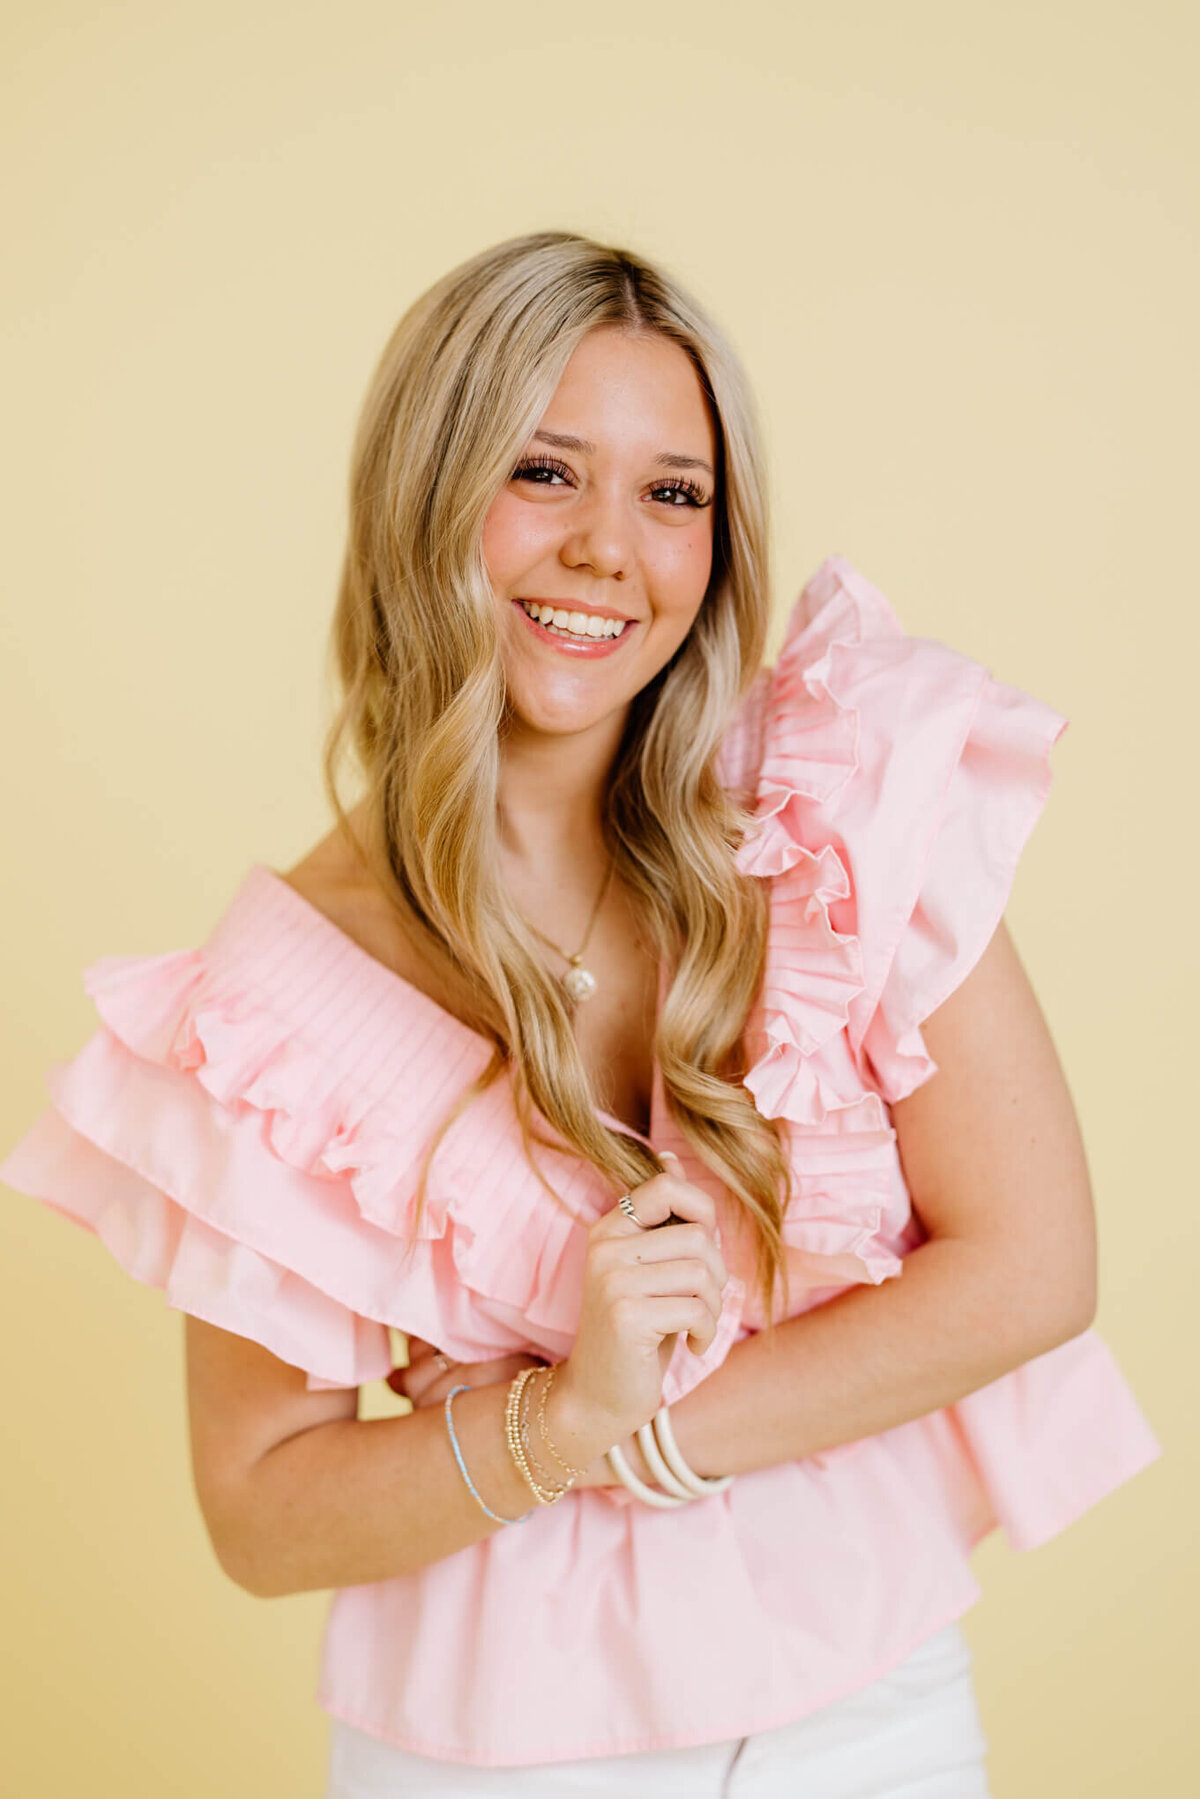 Candid and fun headshot for TCU student in light pink top, white jeans, and light yellow background